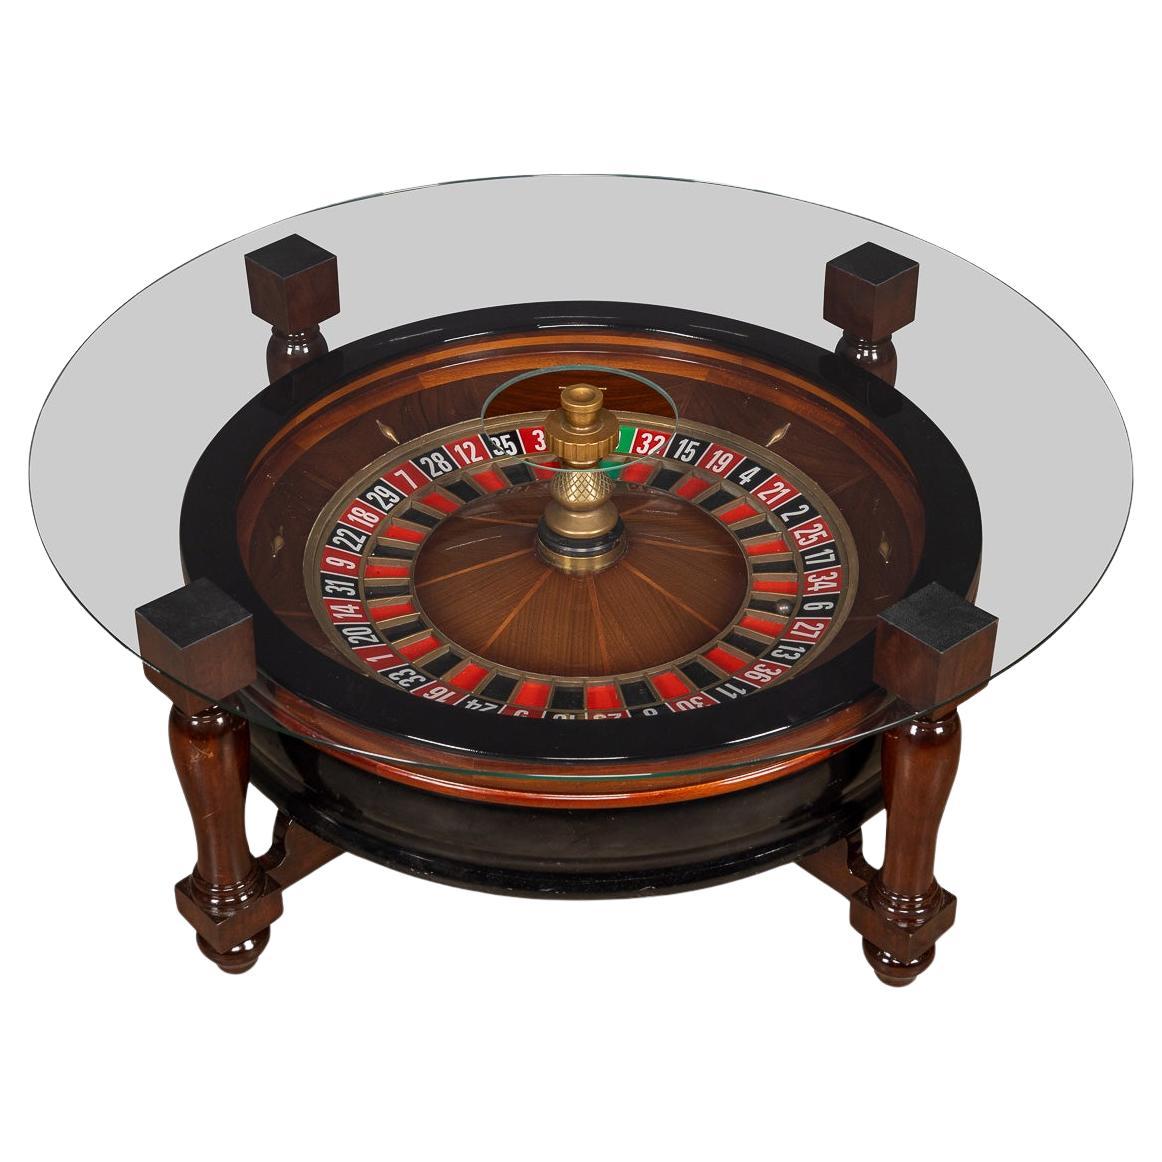 Casino Roulette Wheel Mounted Within A Coffee Table